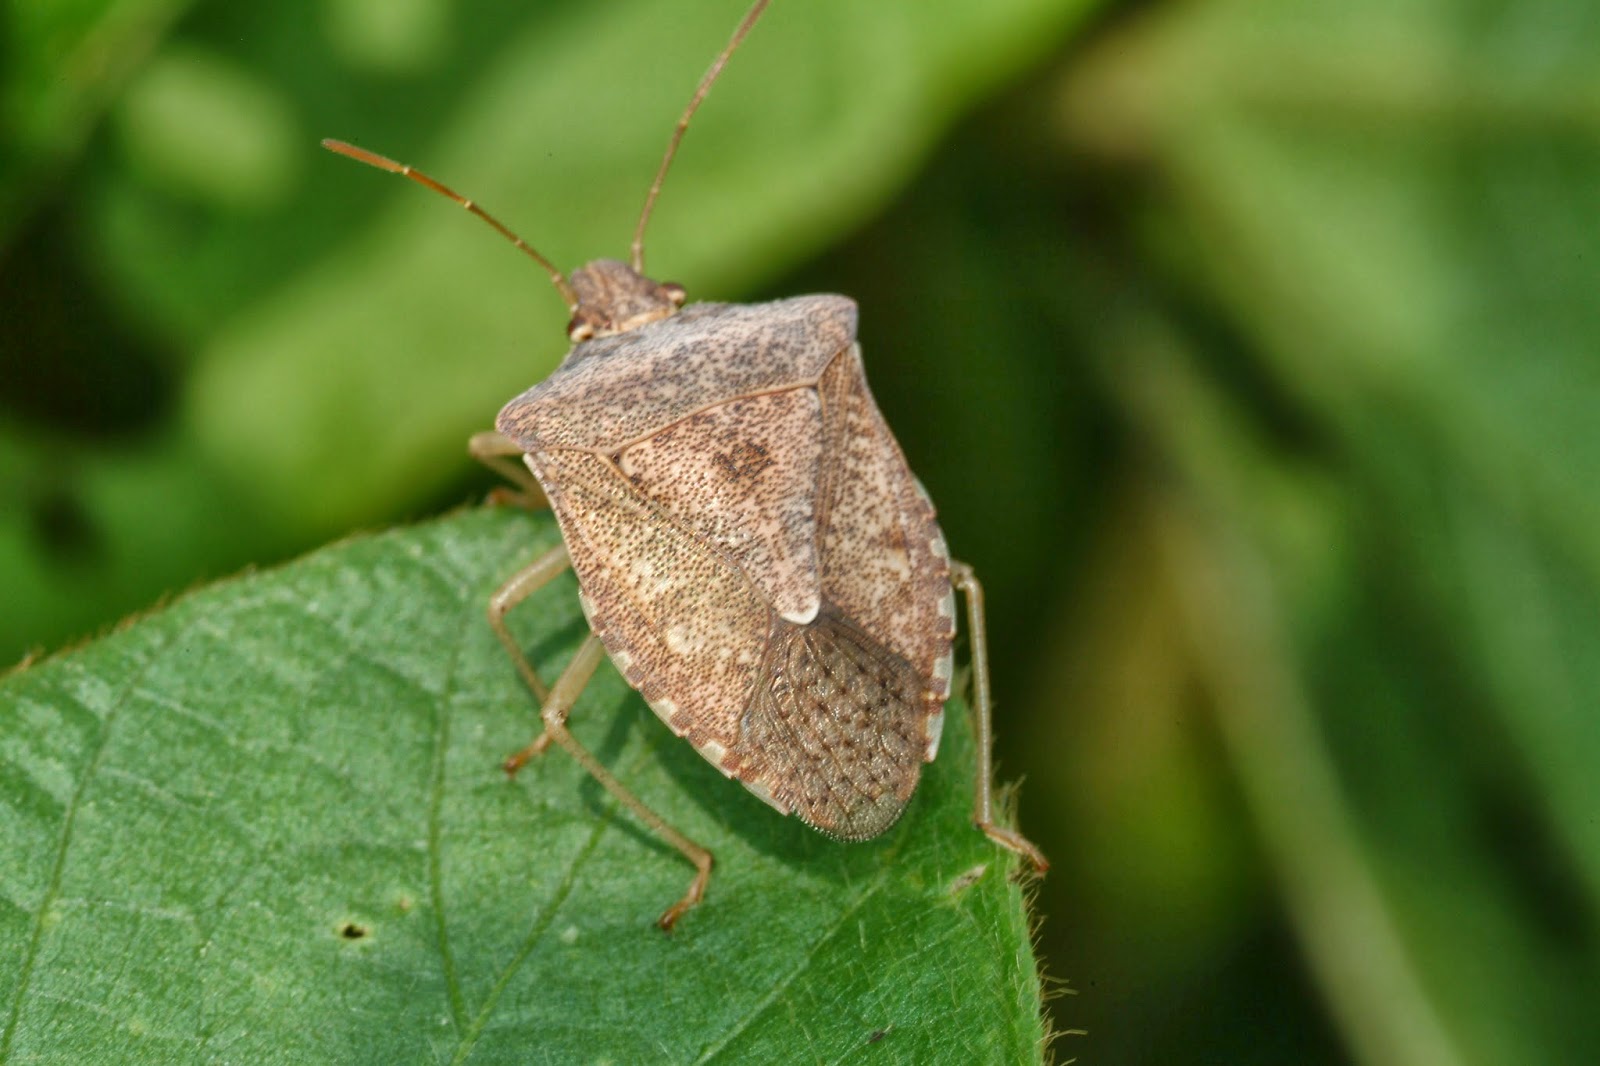 grain-crops-update-stink-bugs-could-still-be-a-problem-in-soybeans